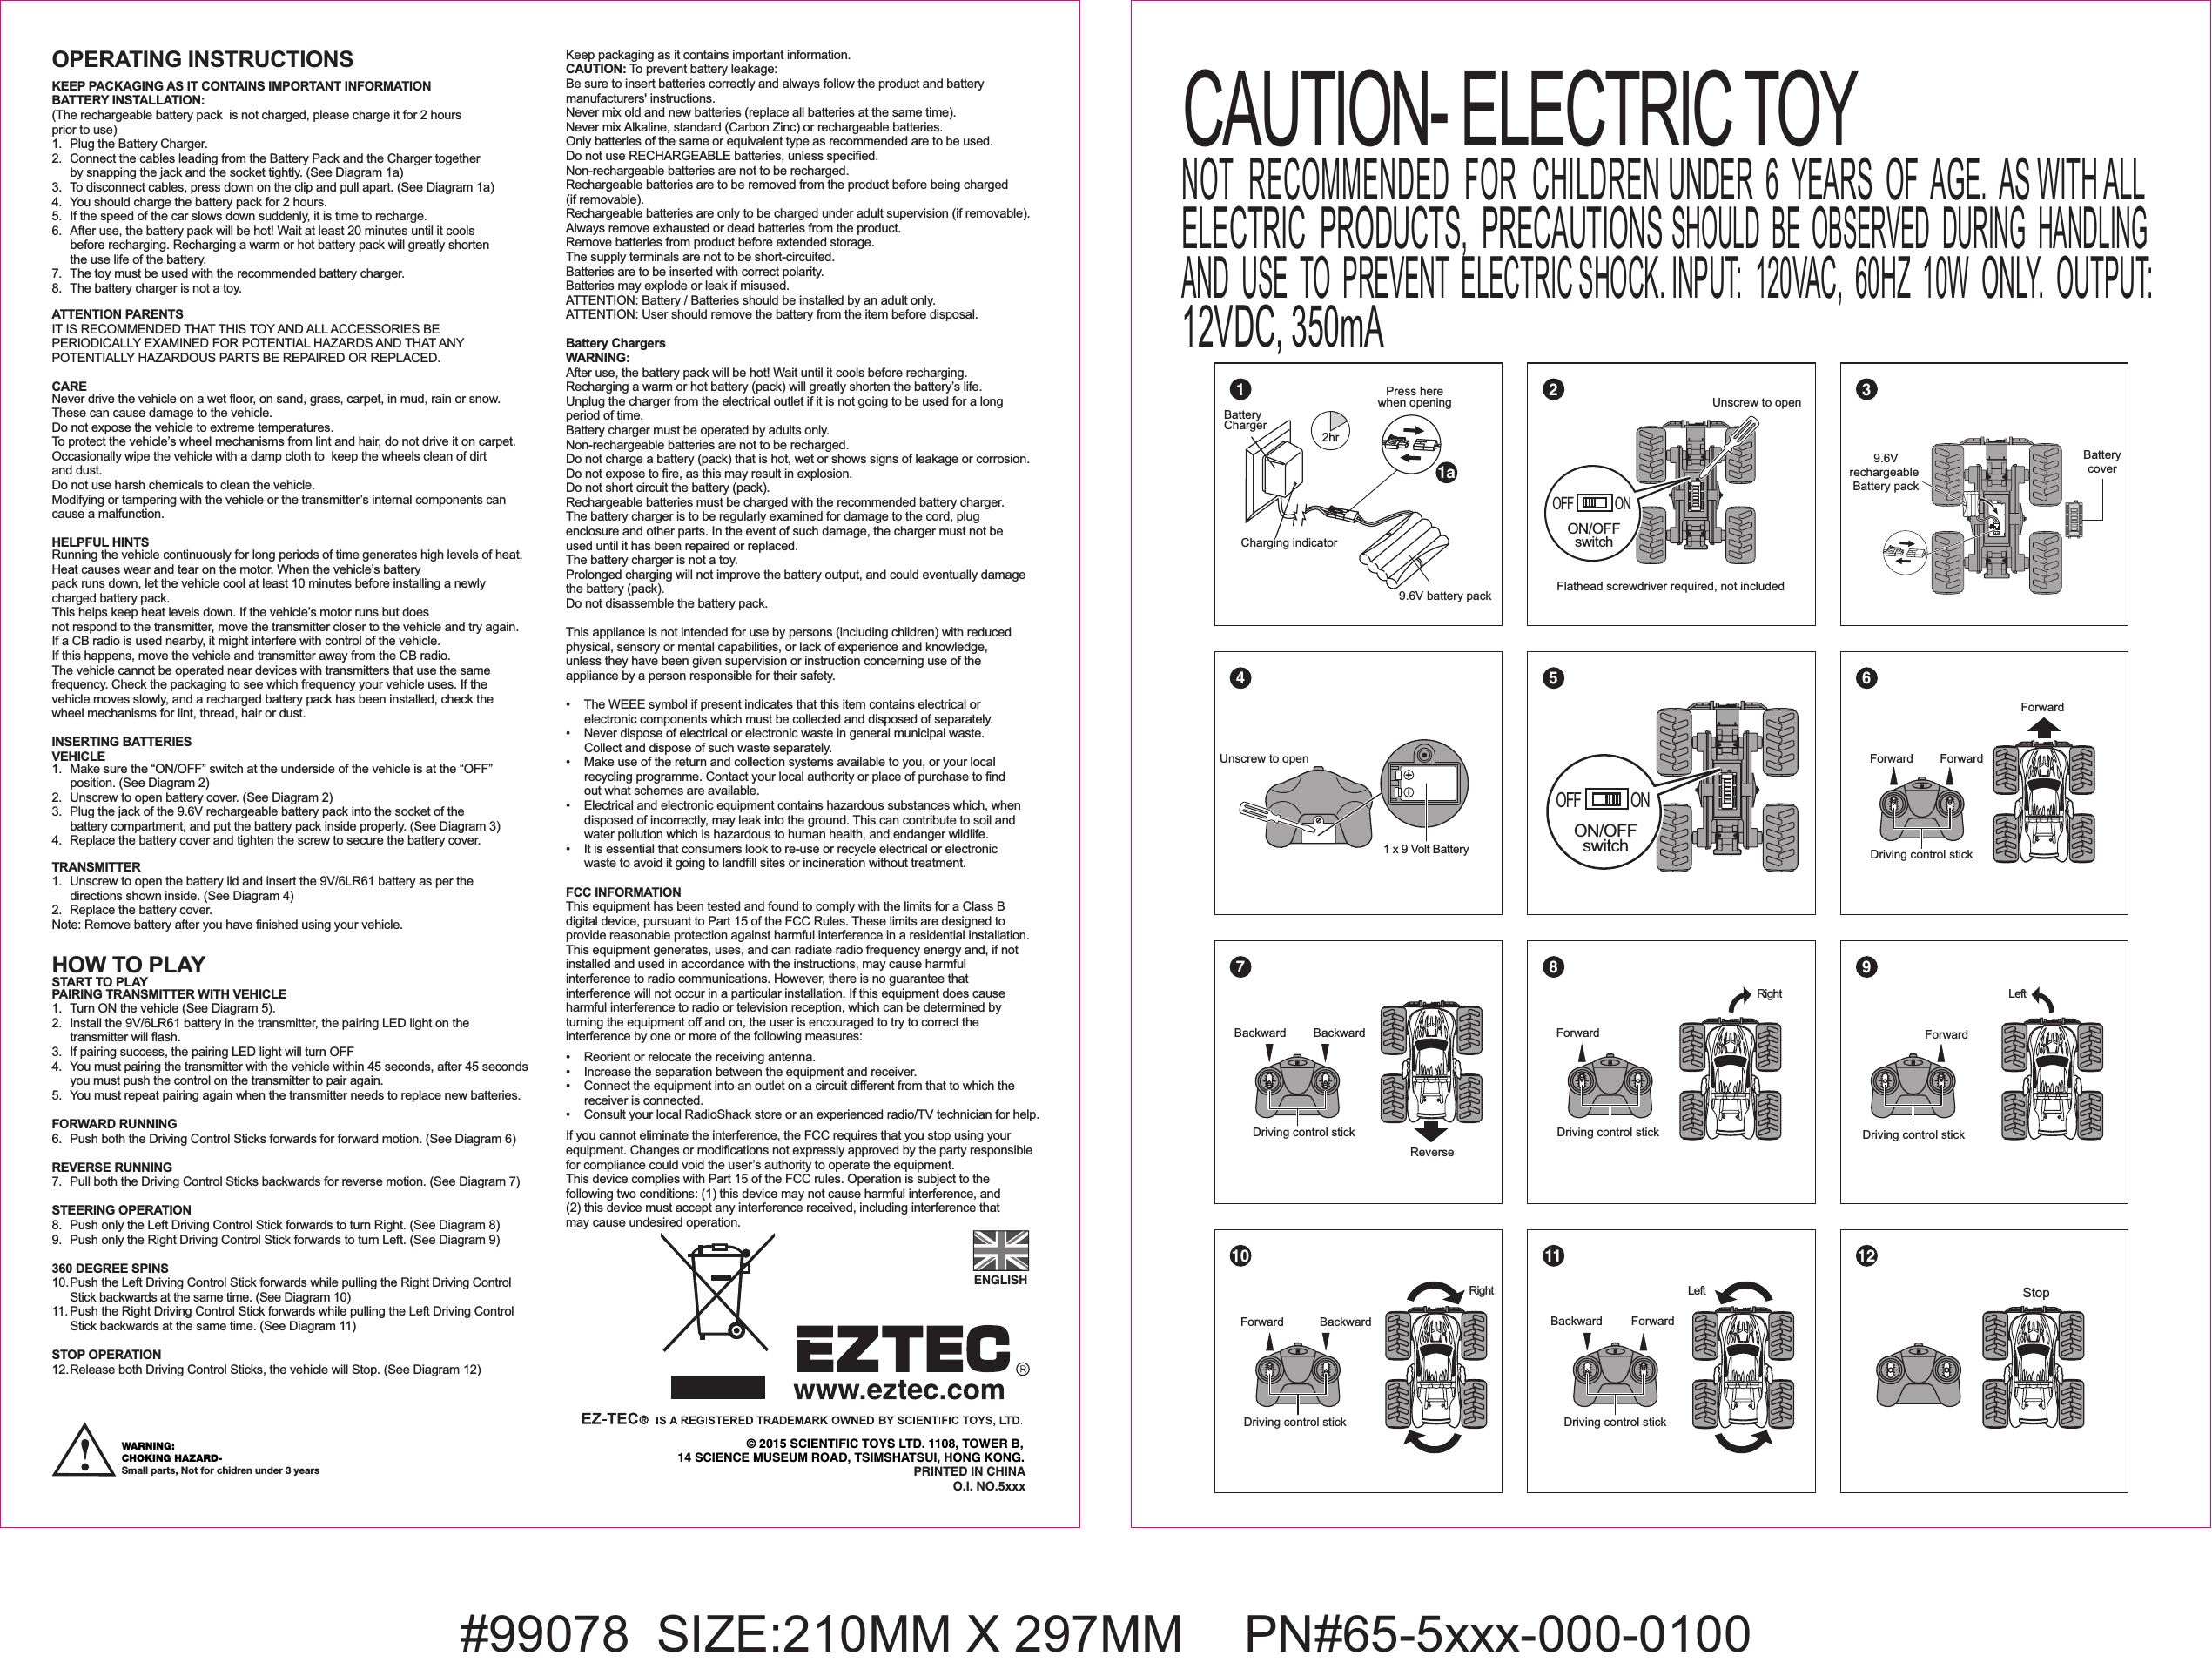 #99078  SIZE:210MM X 297MM   PN#65-5xxx-000-0100OPERATING INSTRUCTIONS KEEP PACKAGING AS IT CONTAINS IMPORTANT INFORMATIONBATTERY INSTALLATION: (The rechargeable battery pack  is not charged, please charge it for 2 hours prior to use)1. Plug the Battery Charger.2.  Connect the cables leading from the Battery Pack and the Charger together  by snapping the jack and the socket tightly. (See Diagram 1a)3.  To disconnect cables, press down on the clip and pull apart. (See Diagram 1a)4.  You should charge the battery pack for 2 hours.5.  If the speed of the car slows down suddenly, it is time to recharge. 6.  After use, the battery pack will be hot! Wait at least 20 minutes until it cools   before recharging. Recharging a warm or hot battery pack will greatly shorten   the use life of the battery.7.  The toy must be used with the recommended battery charger.8.  The battery charger is not a toy.ATTENTION PARENTSIT IS RECOMMENDED THAT THIS TOY AND ALL ACCESSORIES BE PERIODICALLY EXAMINED FOR POTENTIAL HAZARDS AND THAT ANY POTENTIALLY HAZARDOUS PARTS BE REPAIRED OR REPLACED.CARENever drive the vehicle on a wet floor, on sand, grass, carpet, in mud, rain or snow. These can cause damage to the vehicle.Do not expose the vehicle to extreme temperatures.To protect the vehicle’s wheel mechanisms from lint and hair, do not drive it on carpet.Occasionally wipe the vehicle with a damp cloth to  keep the wheels clean of dirt and dust. Do not use harsh chemicals to clean the vehicle.Modifying or tampering with the vehicle or the transmitter’s internal components can cause a malfunction. HELPFUL HINTSRunning the vehicle continuously for long periods of time generates high levels of heat.  Heat causes wear and tear on the motor. When the vehicle’s battery pack runs down, let the vehicle cool at least 10 minutes before installing a newly charged battery pack. This helps keep heat levels down. If the vehicle’s motor runs but does not respond to the transmitter, move the transmitter closer to the vehicle and try again.If a CB radio is used nearby, it might interfere with control of the vehicle. If this happens, move the vehicle and transmitter away from the CB radio. The vehicle cannot be operated near devices with transmitters that use the same frequency. Check the packaging to see which frequency your vehicle uses. If the vehicle moves slowly, and a recharged battery pack has been installed, check thewheel mechanisms for lint, thread, hair or dust.INSERTING BATTERIES VEHICLE1.  Make sure the “ON/OFF” switch at the underside of the vehicle is at the “OFF”   position. (See Diagram 2) 2.  Unscrew to open battery cover. (See Diagram 2)3.  Plug the jack of the 9.6V rechargeable battery pack into the socket of the   battery compartment, and put the battery pack inside properly. (See Diagram 3)4.  Replace the battery cover and tighten the screw to secure the battery cover.TRANSMITTER1.  Unscrew to open the battery lid and insert the 9V/6LR61 battery as per the   directions shown inside. (See Diagram 4)2.  Replace the battery cover. Note: Remove battery after you have finished using your vehicle.HOW TO PLAYSTART TO PLAYPAIRING TRANSMITTER WITH VEHICLE1.  Turn ON the vehicle (See Diagram 5).2.  Install the 9V/6LR61 battery in the transmitter, the pairing LED light on the   transmitter will flash.3.  If pairing success, the pairing LED light will turn OFF4.  You must pairing the transmitter with the vehicle within 45 seconds, after 45 seconds   you must push the control on the transmitter to pair again.5.  You must repeat pairing again when the transmitter needs to replace new batteries.FORWARD RUNNING6.  Push both the Driving Control Sticks forwards for forward motion. (See Diagram 6)REVERSE RUNNING7.  Pull both the Driving Control Sticks backwards for reverse motion. (See Diagram 7)STEERING OPERATION8.  Push only the Left Driving Control Stick forwards to turn Right. (See Diagram 8)9.  Push only the Right Driving Control Stick forwards to turn Left. (See Diagram 9)360 DEGREE SPINS10. Push the Left Driving Control Stick forwards while pulling the Right Driving Control   Stick backwards at the same time. (See Diagram 10)11. Push the Right Driving Control Stick forwards while pulling the Left Driving Control   Stick backwards at the same time. (See Diagram 11)STOP OPERATION12. Release both Driving Control Sticks, the vehicle will Stop. (See Diagram 12)Keep packaging as it contains important information.CAUTION: To prevent battery leakage:Be sure to insert batteries correctly and always follow the product and battery manufacturers&apos; instructions.Never mix old and new batteries (replace all batteries at the same time).Never mix Alkaline, standard (Carbon Zinc) or rechargeable batteries.Only batteries of the same or equivalent type as recommended are to be used.Do not use RECHARGEABLE batteries, unless specified.Non-rechargeable batteries are not to be recharged.Rechargeable batteries are to be removed from the product before being charged (if removable).Rechargeable batteries are only to be charged under adult supervision (if removable).Always remove exhausted or dead batteries from the product. Remove batteries from product before extended storage.The supply terminals are not to be short-circuited.Batteries are to be inserted with correct polarity.Batteries may explode or leak if misused.ATTENTION: Battery / Batteries should be installed by an adult only. ATTENTION: User should remove the battery from the item before disposal.Battery ChargersWARNING:After use, the battery pack will be hot! Wait until it cools before recharging.Recharging a warm or hot battery (pack) will greatly shorten the battery’s life.Unplug the charger from the electrical outlet if it is not going to be used for a long period of time.Battery charger must be operated by adults only.Non-rechargeable batteries are not to be recharged.Do not charge a battery (pack) that is hot, wet or shows signs of leakage or corrosion.Do not expose to fire, as this may result in explosion.Do not short circuit the battery (pack).Rechargeable batteries must be charged with the recommended battery charger.The battery charger is to be regularly examined for damage to the cord, plug enclosure and other parts. In the event of such damage, the charger must not be used until it has been repaired or replaced. The battery charger is not a toy.Prolonged charging will not improve the battery output, and could eventually damage the battery (pack).Do not disassemble the battery pack.This appliance is not intended for use by persons (including children) with reduced physical, sensory or mental capabilities, or lack of experience and knowledge, unless they have been given supervision or instruction concerning use of the appliance by a person responsible for their safety.•  The WEEE symbol if present indicates that this item contains electrical or   electronic components which must be collected and disposed of separately.•  Never dispose of electrical or electronic waste in general municipal waste.   Collect and dispose of such waste separately. •  Make use of the return and collection systems available to you, or your local   recycling programme. Contact your local authority or place of purchase to find   out what schemes are available.•  Electrical and electronic equipment contains hazardous substances which, when   disposed of incorrectly, may leak into the ground. This can contribute to soil and   water pollution which is hazardous to human health, and endanger wildlife.•  It is essential that consumers look to re-use or recycle electrical or electronic  waste to avoid it going to landfill sites or incineration without treatment.FCC INFORMATIONThis equipment has been tested and found to comply with the limits for a Class B digital device, pursuant to Part 15 of the FCC Rules. These limits are designed to provide reasonable protection against harmful interference in a residential installation. This equipment generates, uses, and can radiate radio frequency energy and, if not installed and used in accordance with the instructions, may cause harmful interference to radio communications. However, there is no guarantee that interference will not occur in a particular installation. If this equipment does cause harmful interference to radio or television reception, which can be determined by turning the equipment off and on, the user is encouraged to try to correct the interference by one or more of the following measures:•   Reorient or relocate the receiving antenna.•   Increase the separation between the equipment and receiver.•   Connect the equipment into an outlet on a circuit different from that to which the  receiver is connected.•   Consult your local RadioShack store or an experienced radio/TV technician for help.If you cannot eliminate the interference, the FCC requires that you stop using your equipment. Changes or modifications not expressly approved by the party responsible for compliance could void the user’s authority to operate the equipment.This device complies with Part 15 of the FCC rules. Operation is subject to the following two conditions: (1) this device may not cause harmful interference, and (2) this device must accept any interference received, including interference that may cause undesired operation.© 2015 SCIENTIFIC TOYS LTD. 1108, TOWER B,14 SCIENCE MUSEUM ROAD, TSIMSHATSUI, HONG KONG.PRINTED IN CHINAO.I. NO.5xxxENGLISH1 x 9 Volt BatteryUnscrew to openDriving control stickRightForward BackwardUnscrew to openFlathead screwdriver required, not includedOFF ONON/OFFswitch11a2 34 5 67 8 910 11 12OFF ONON/OFFswitch Driving control stickForward ForwardForwardDriving control stickBackward BackwardReverseDriving control stickForwardRightDriving control stickLeftForwardDriving control stickLeftForwardBackwardStopBatteryCharger2hrCharging indicator9.6V battery packPress herewhen openingBatterycover9.6Vrechargeable Battery packWARNING: CHOKING HAZARD-Small parts, Not for chidren under 3 yearsCAUTION- ELECTRIC TOYNOT  RECOMMENDED  FOR  CHILDREN UNDER  6  YEARS  OF  AGE.  AS WITH ALLELECTRIC  PRODUCTS,  PRECAUTIONS SHOULD  BE  OBSERVED  DURING  HANDLINGAND  USE  TO  PREVENT  ELECTRIC SHOCK. INPUT:  120VAC,  60HZ  10W  ONLY.  OUTPUT:12VDC, 350mA